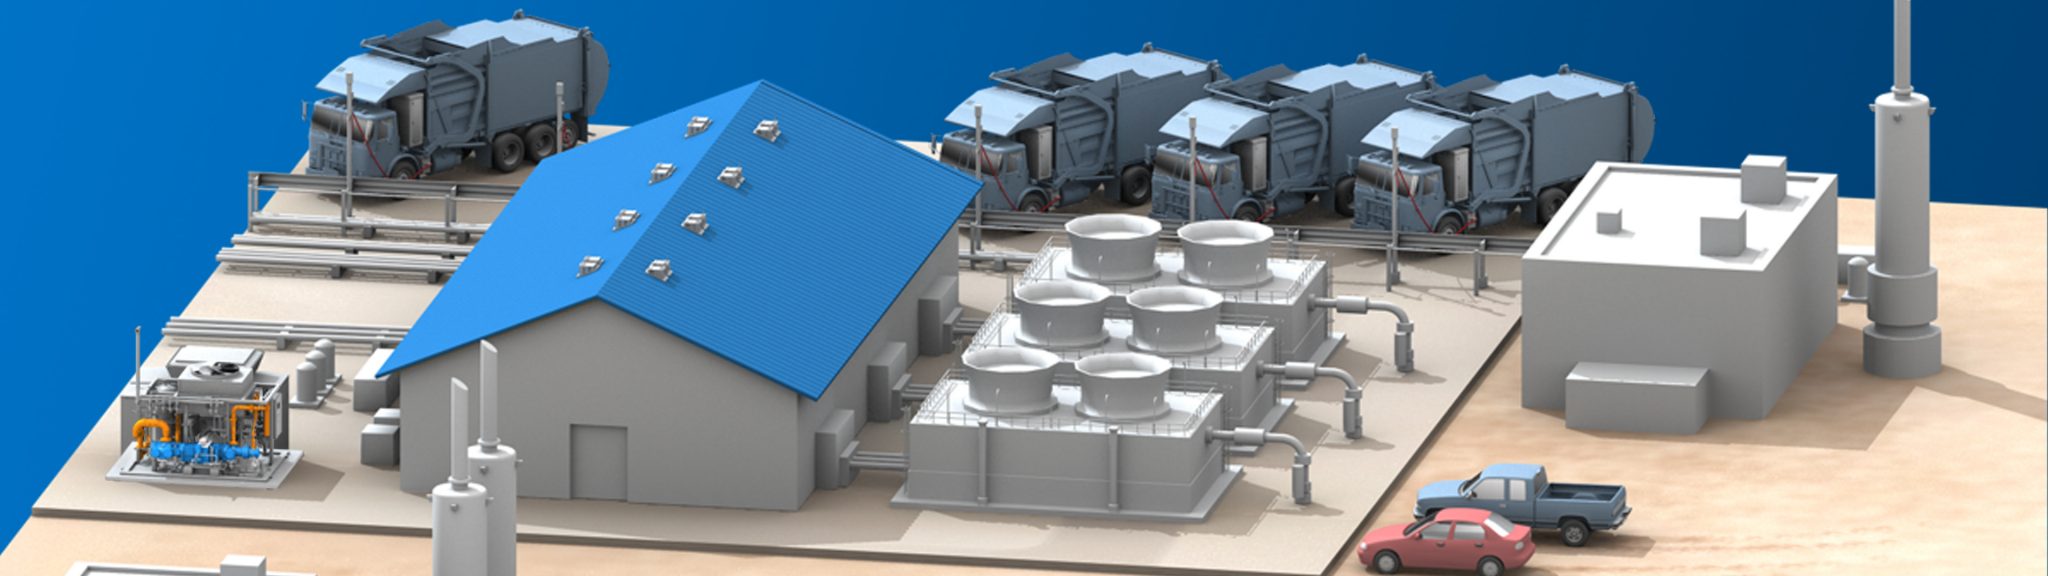 A render of a compressing and processing station at a landfill